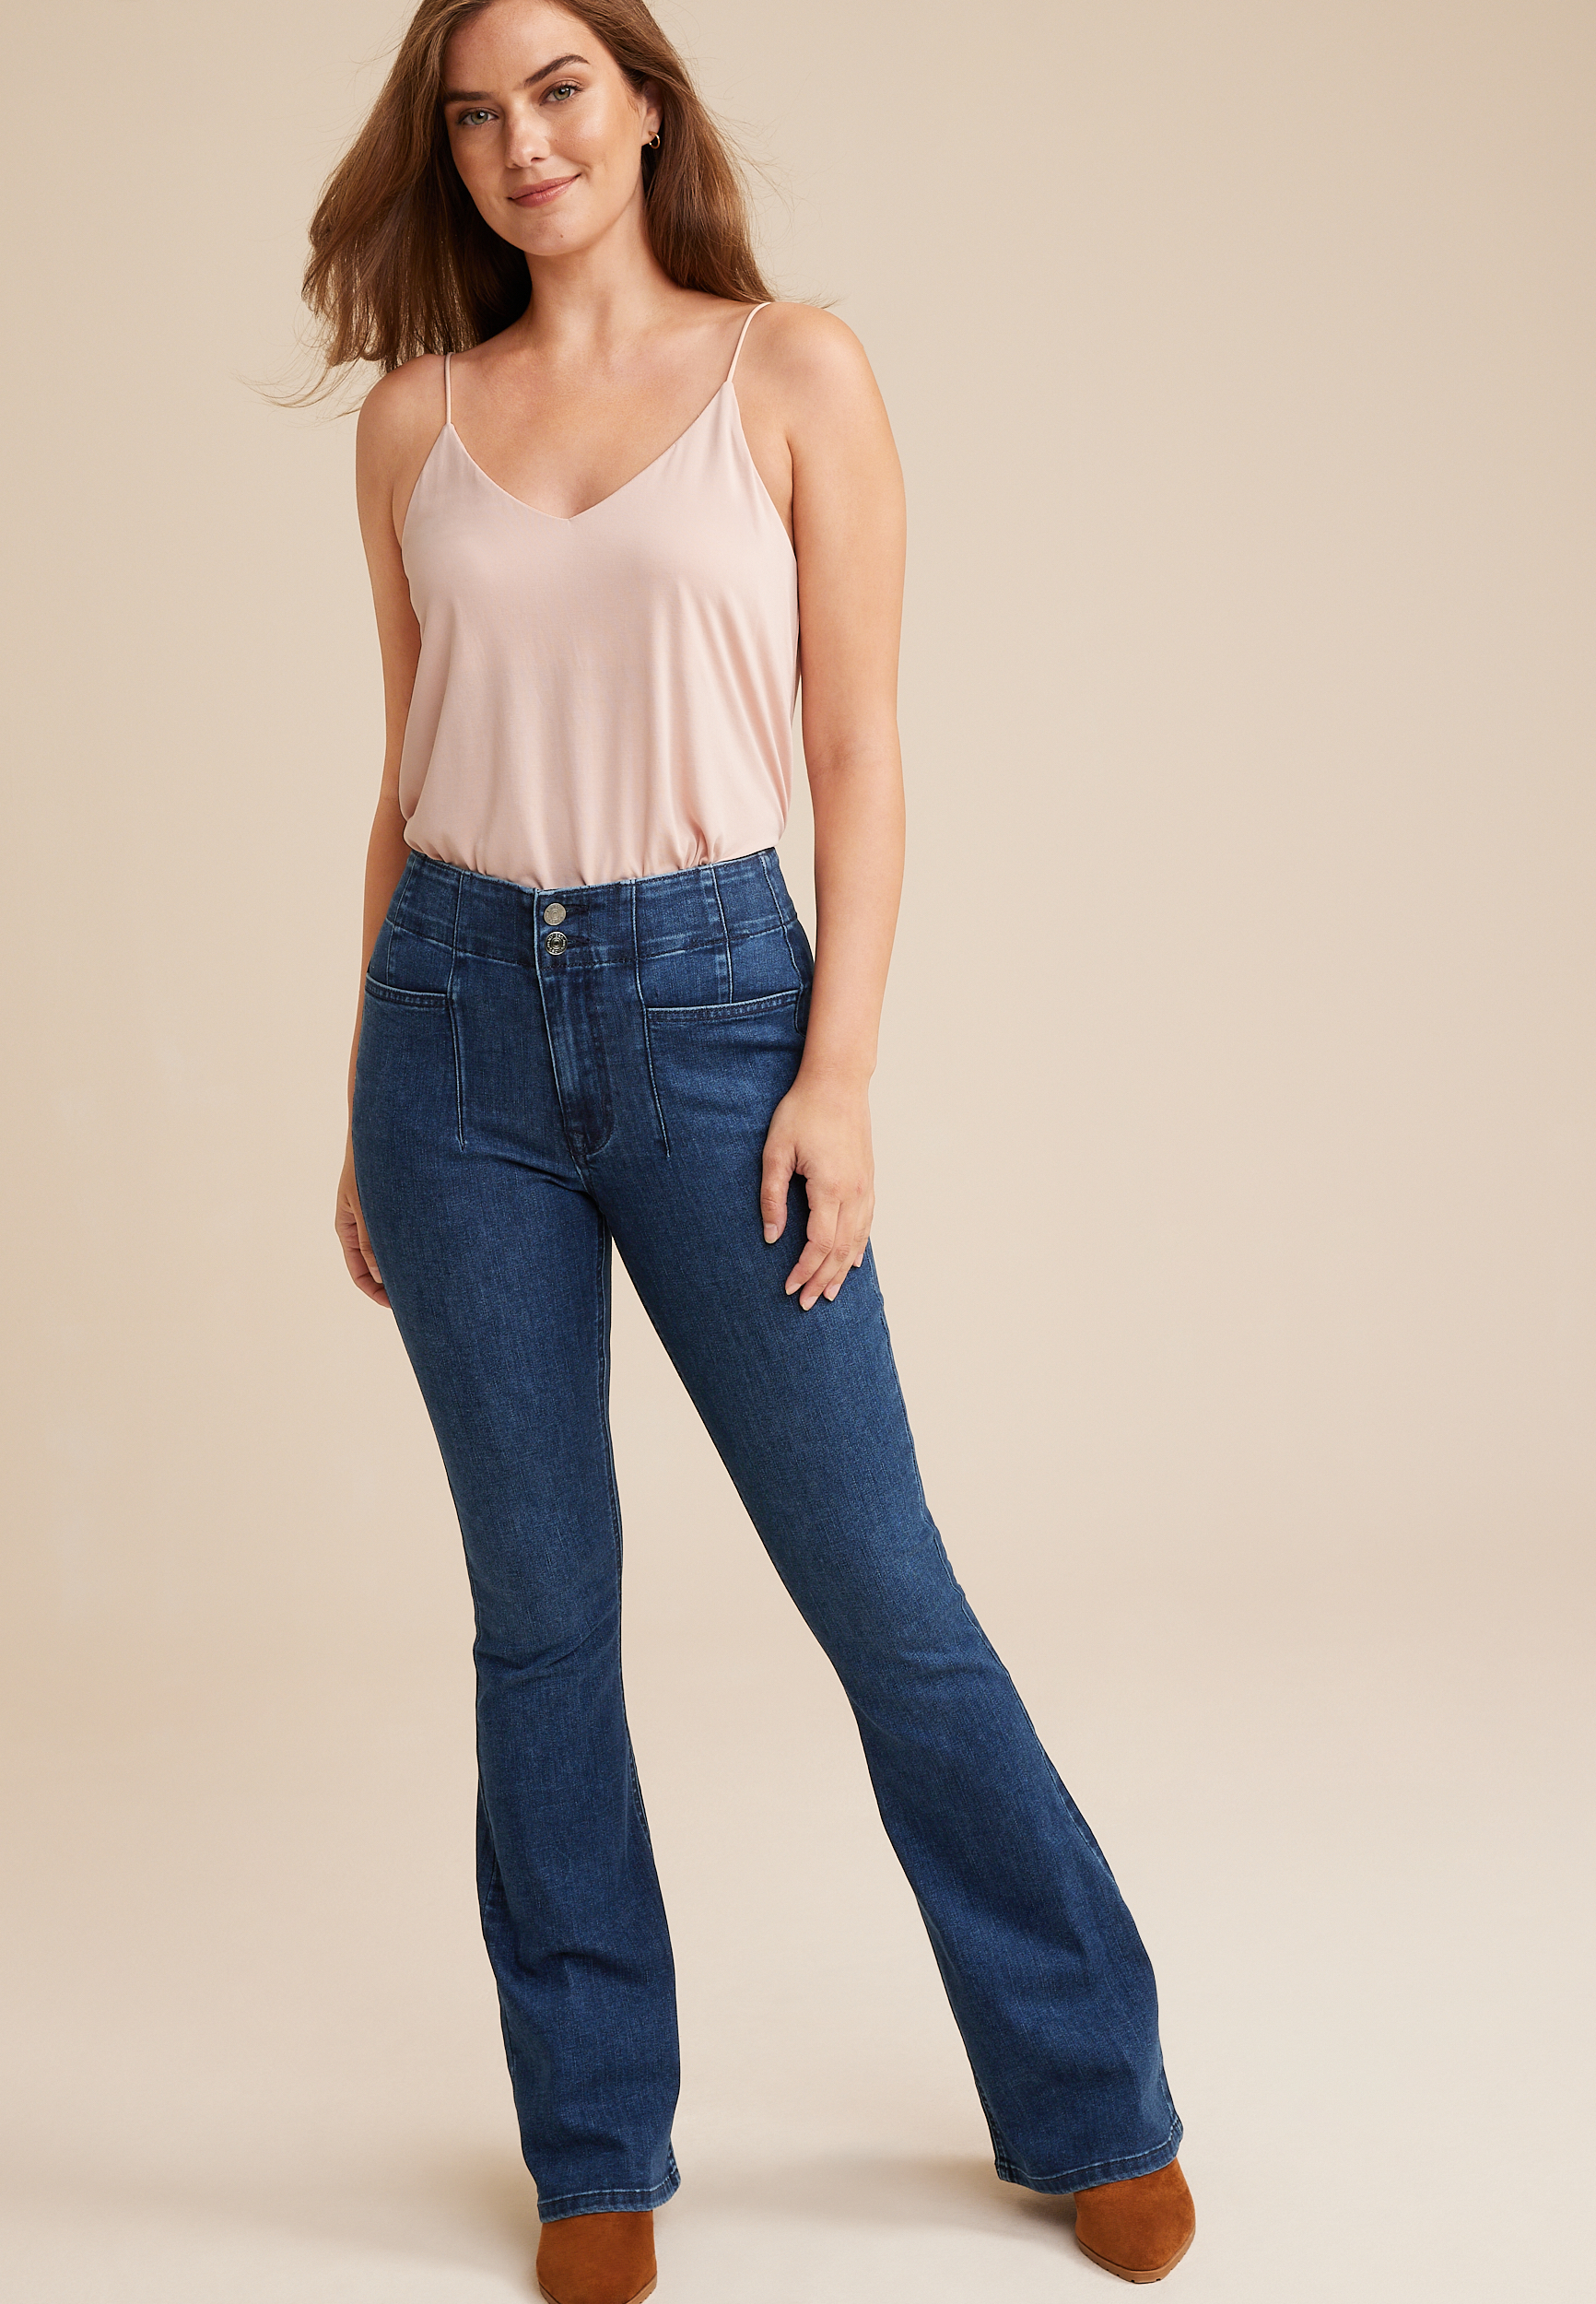 High Waisted Seamed Front Flare Petite Wide Leg Jeans With Wide Leg And  Elastic Waist For Women Baggy Bell Bottom Style Style #2307242 From  Jiehan_shop, $22.25